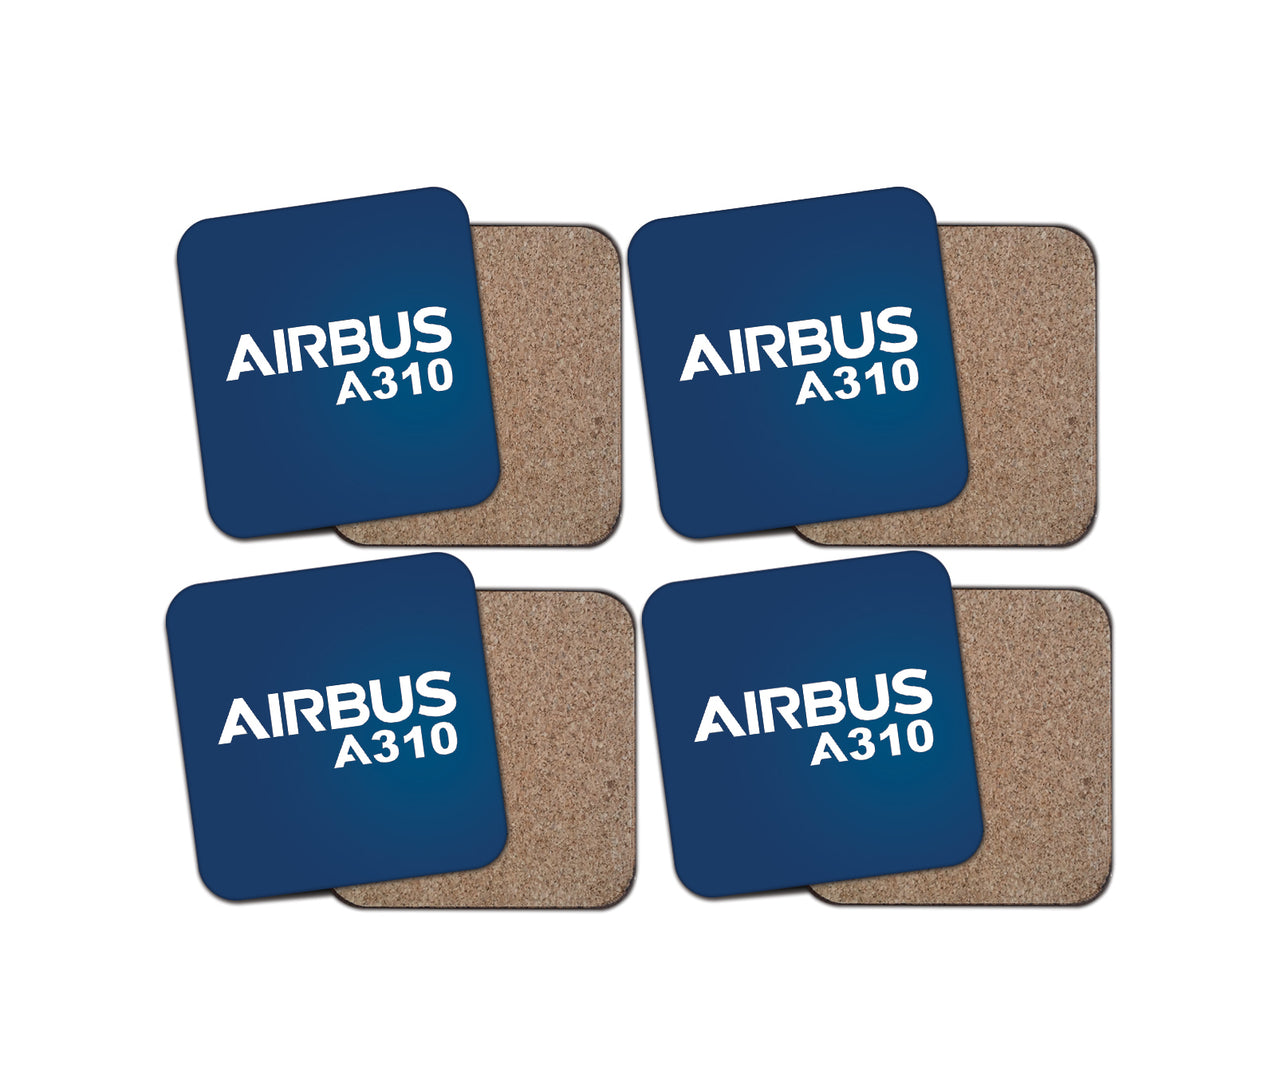 Airbus A310 & Text Designed Coasters